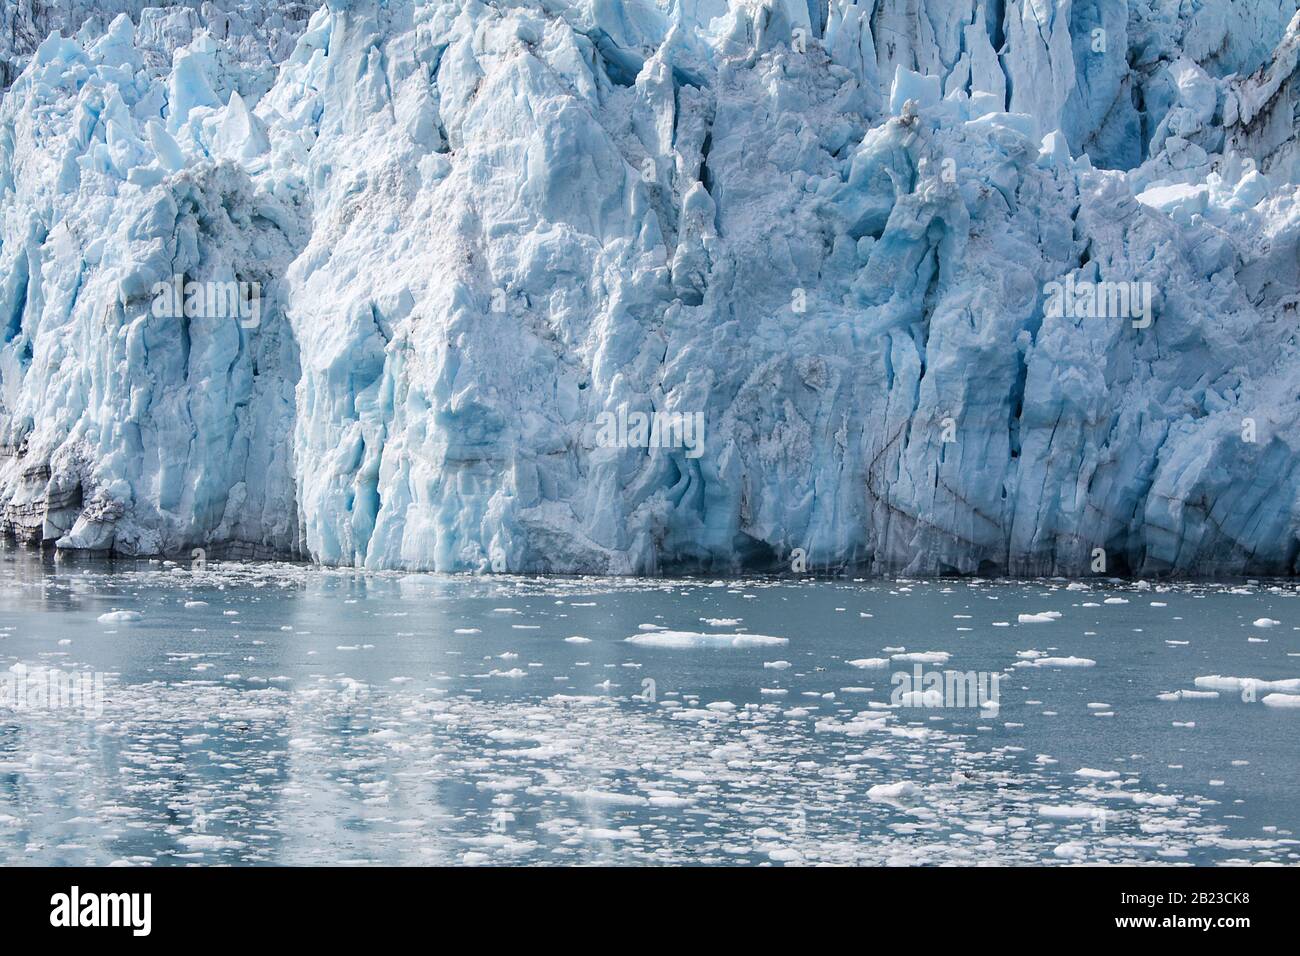 Alaska, USA: Close up view of Surprise Glacier in Prince William Sound (Gulf of Alaska) with reflections on ice lake Stock Photo